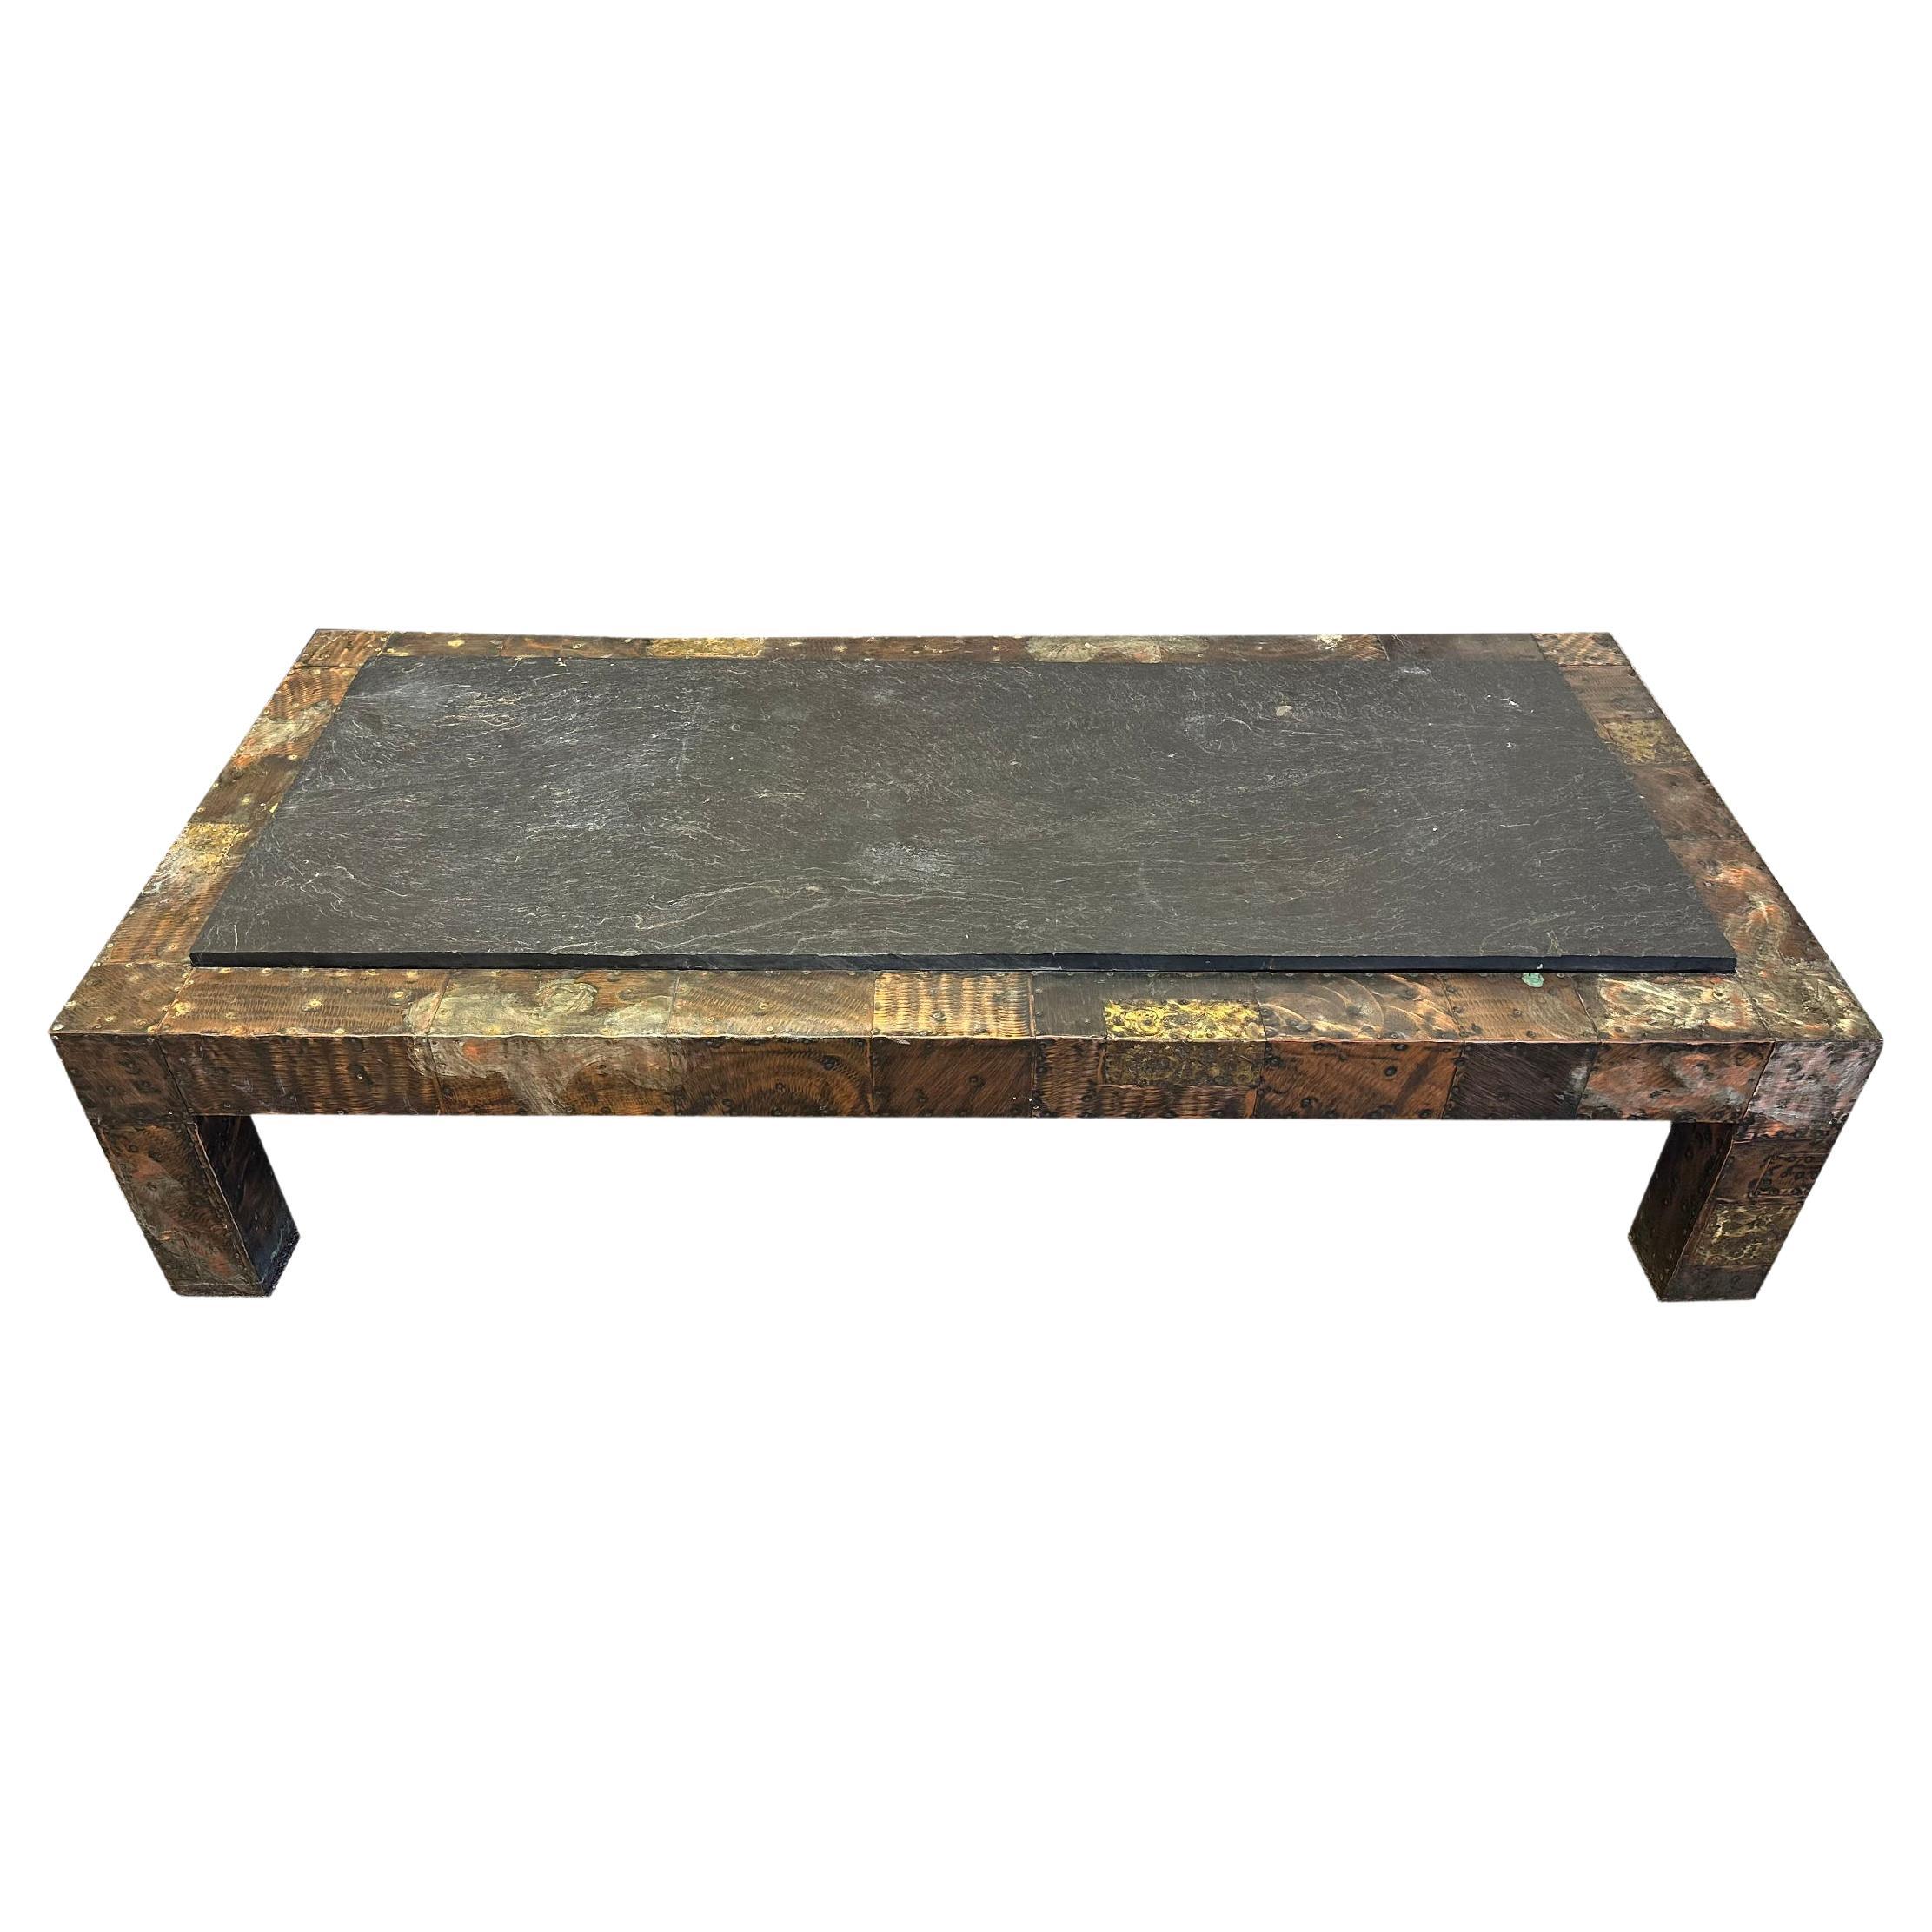 A metal Brutalist patchwork coffee table with slate top designed by the American designer Paul Evans (1931-1987) for Directional. This substantial coffee table is made from a wooden base with a mixed metal patchwork design wrapped over the wood. A